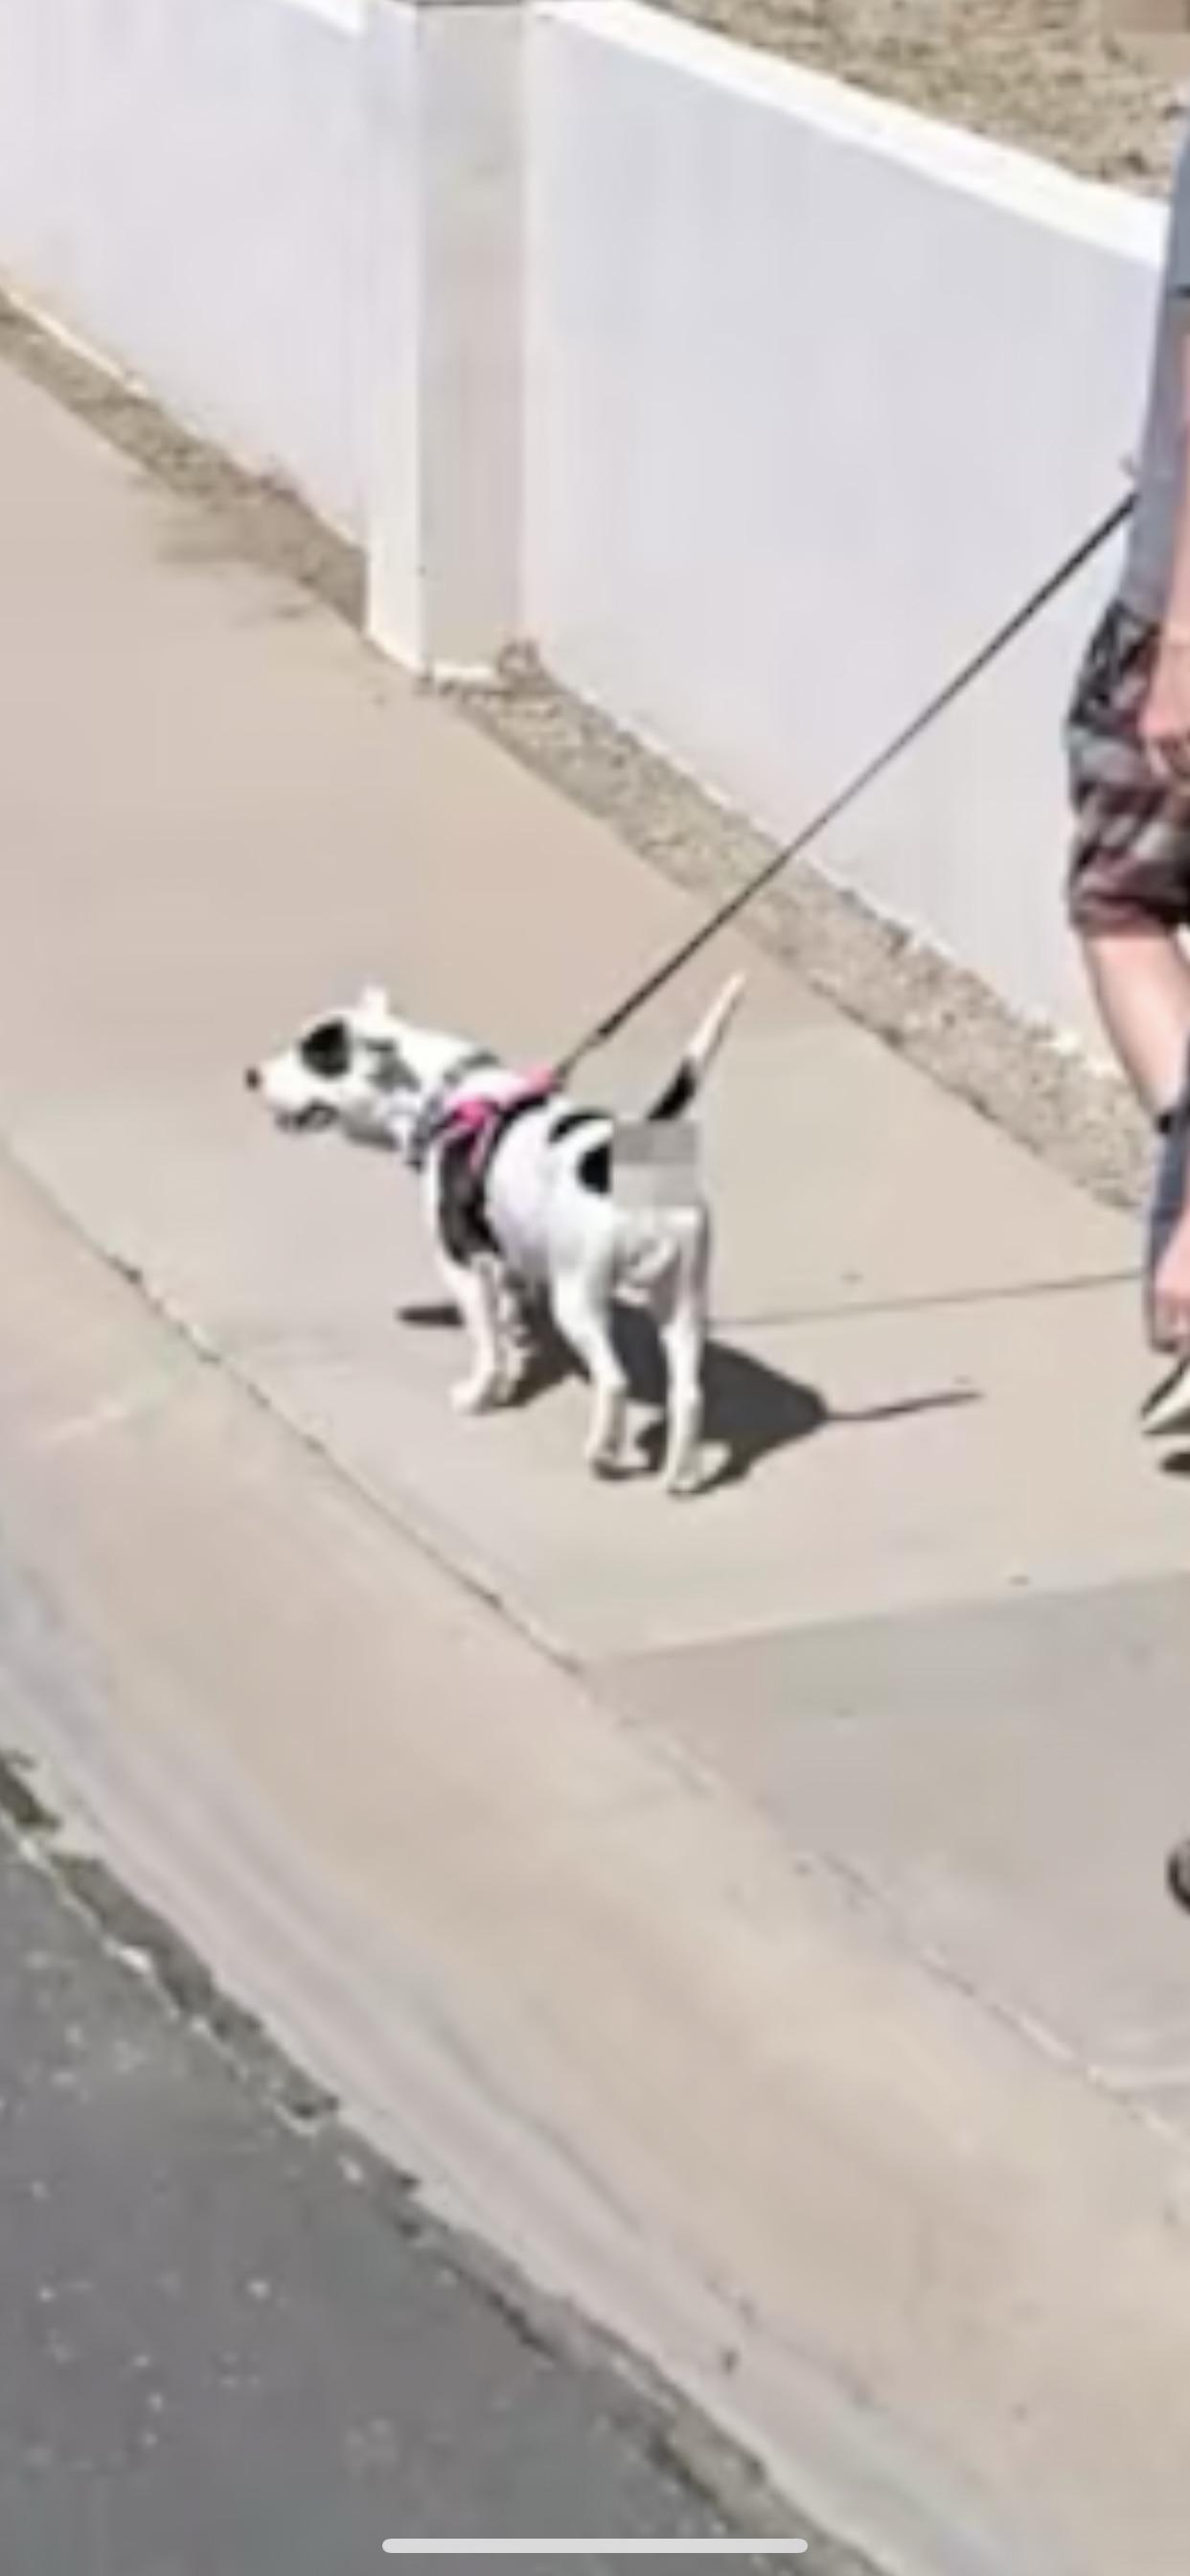 Apple Maps street view is blurring out doge butt bits. 